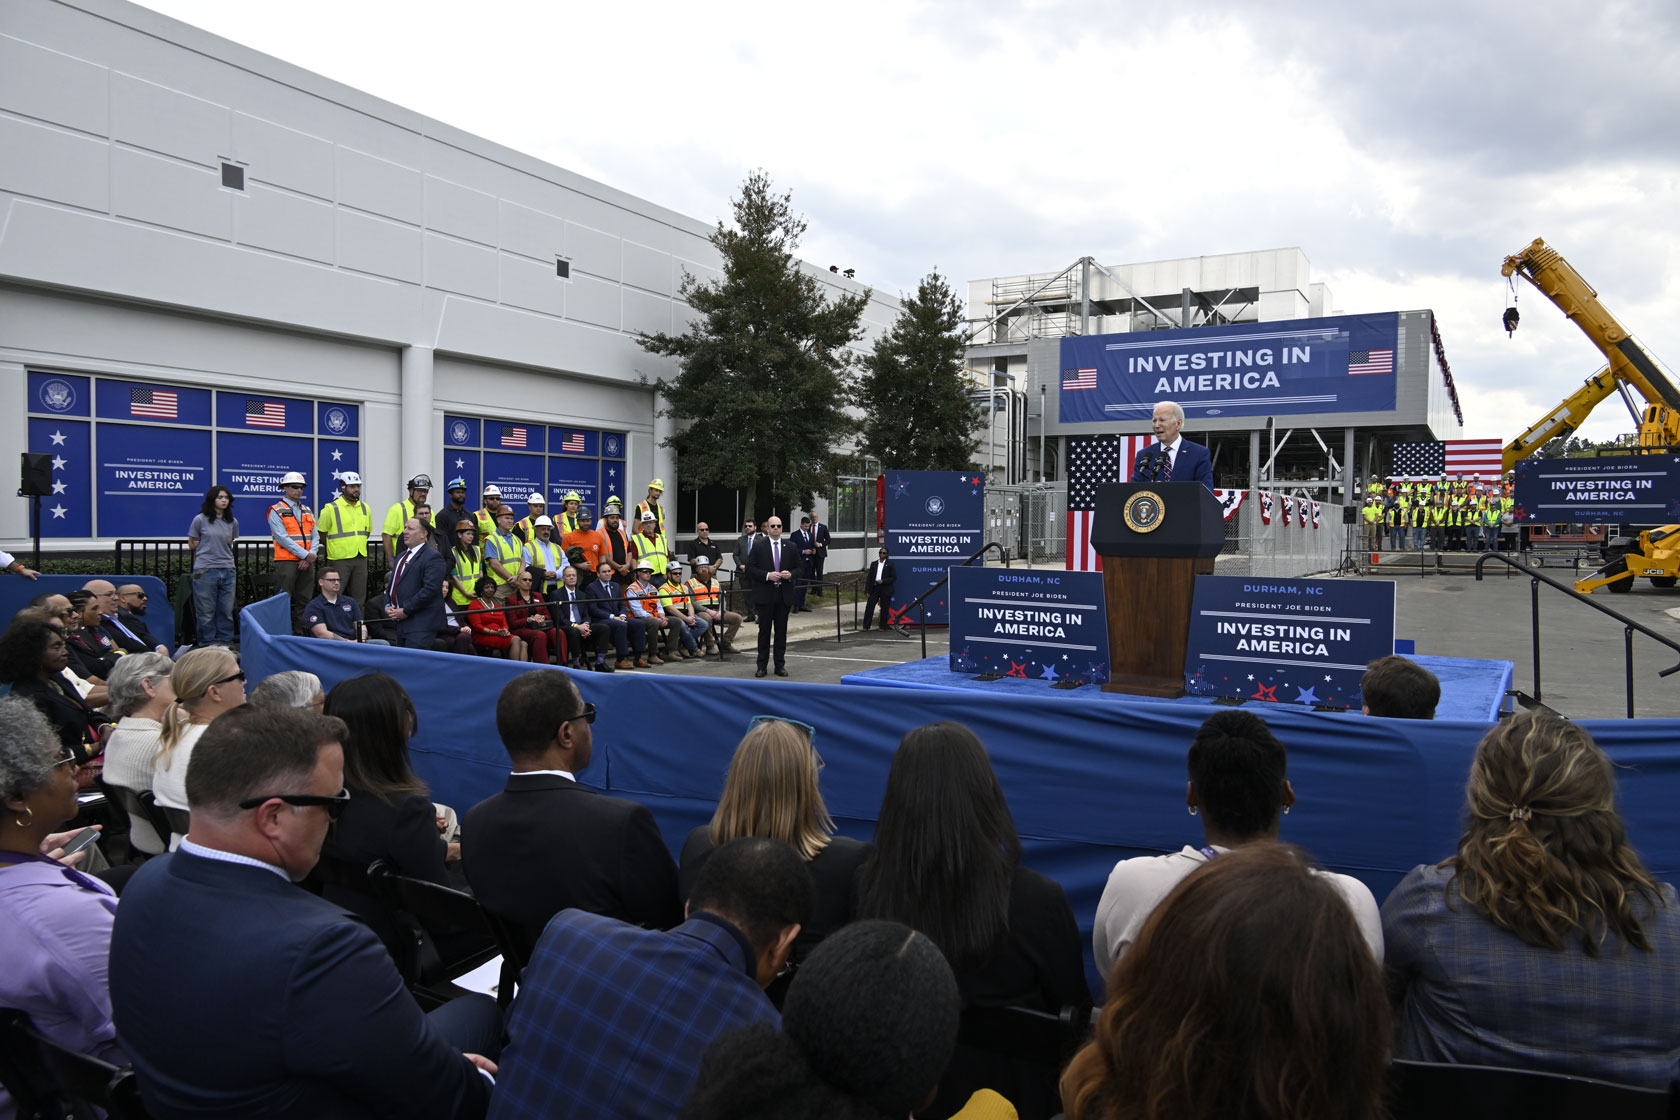 President Joe Biden speaks outside of a building at a podium in front of a crowd including construction workers.